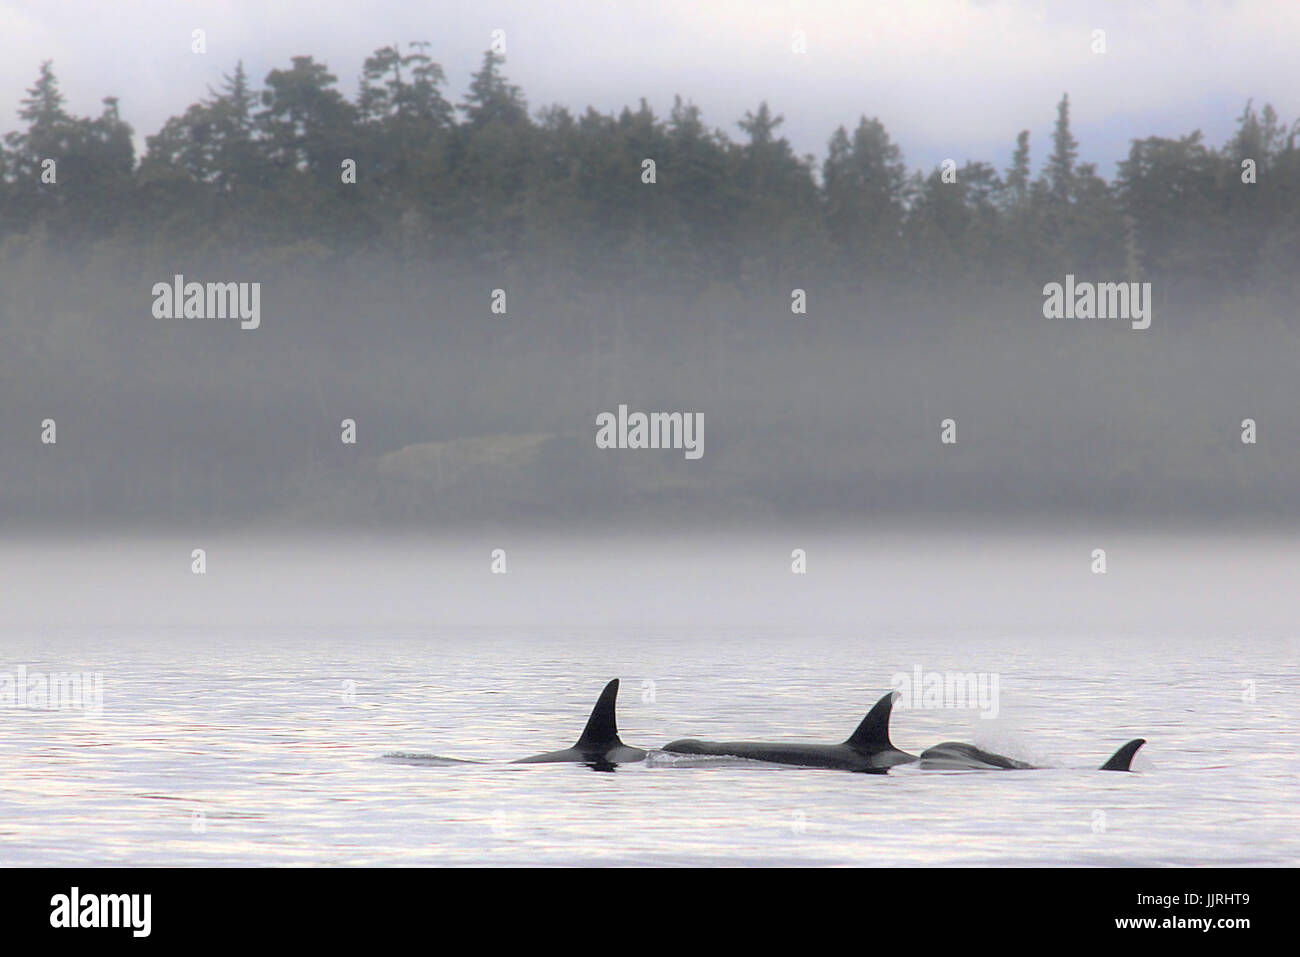 Family of Northern Resident orca killer whales surfacing in the mist near Telegraph Cove in British Columbia Stock Photo